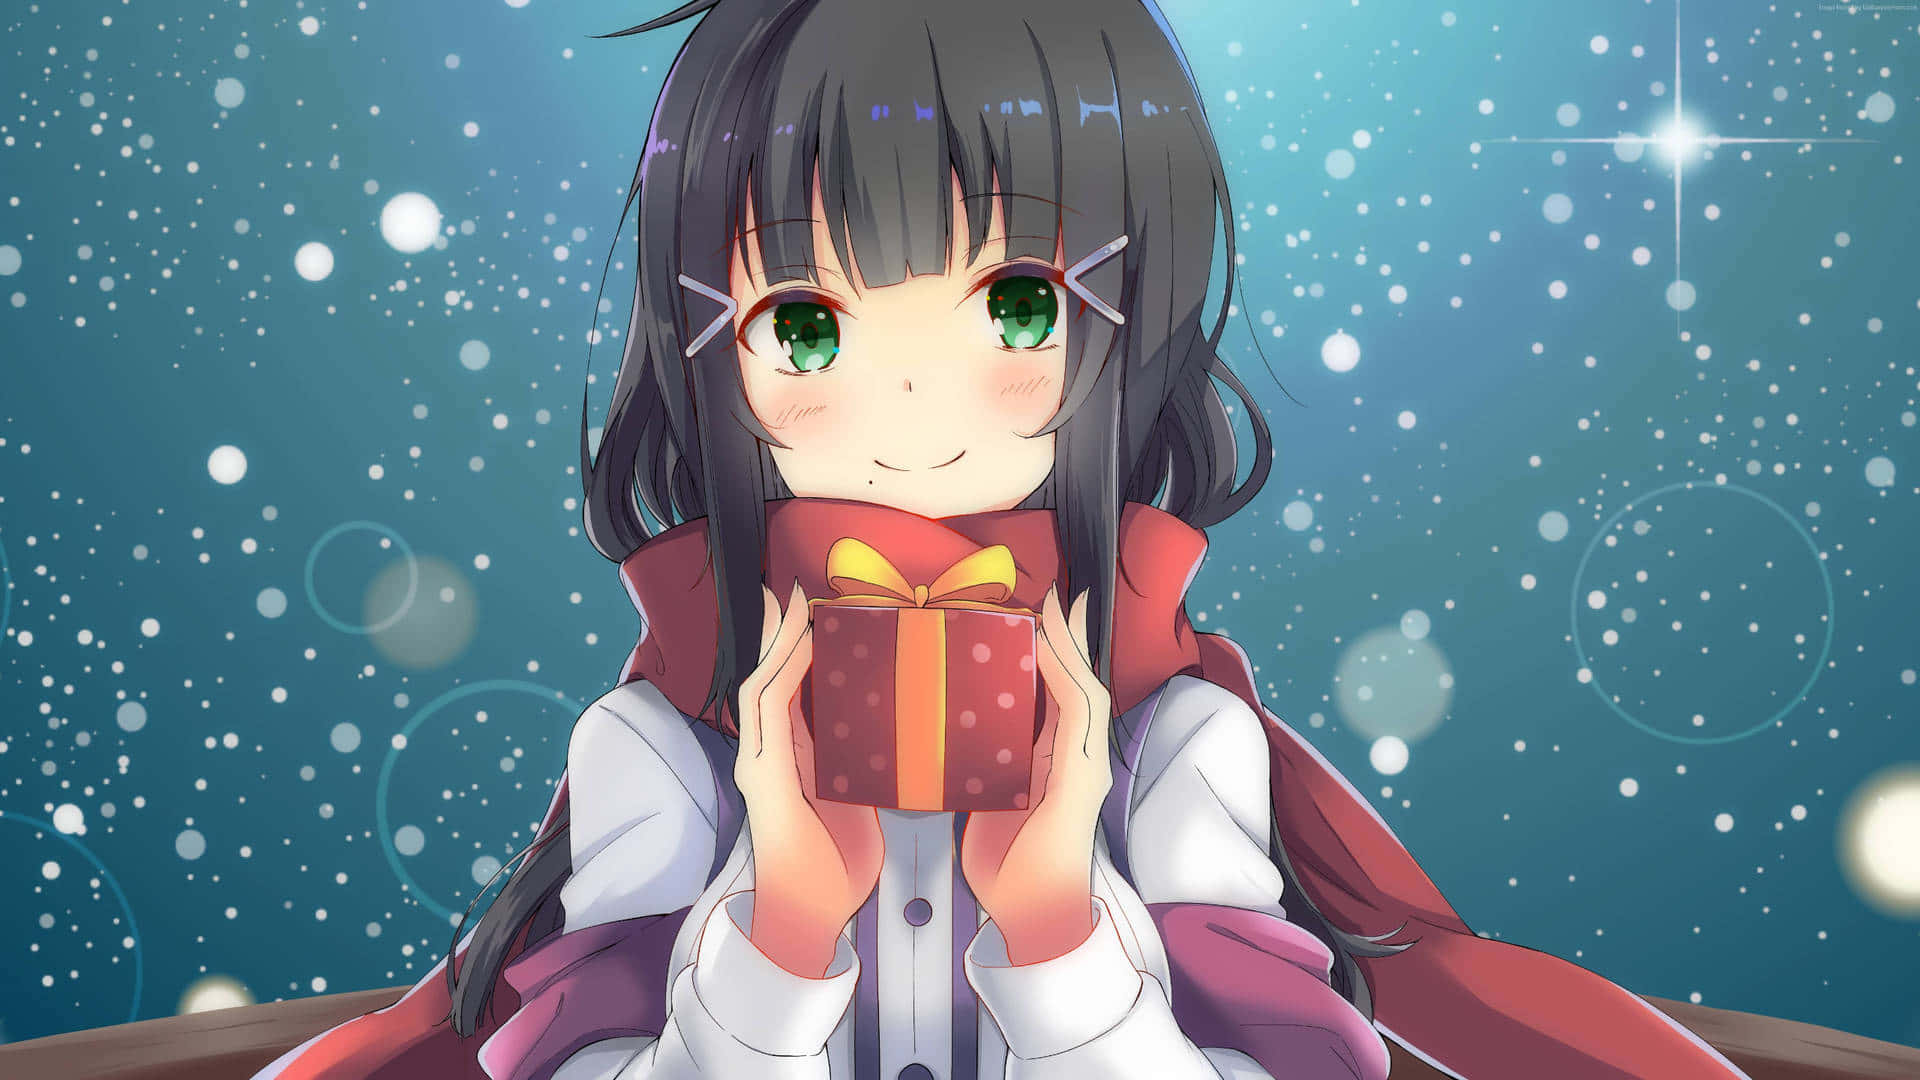 Celebrate Christmas in the Anime World